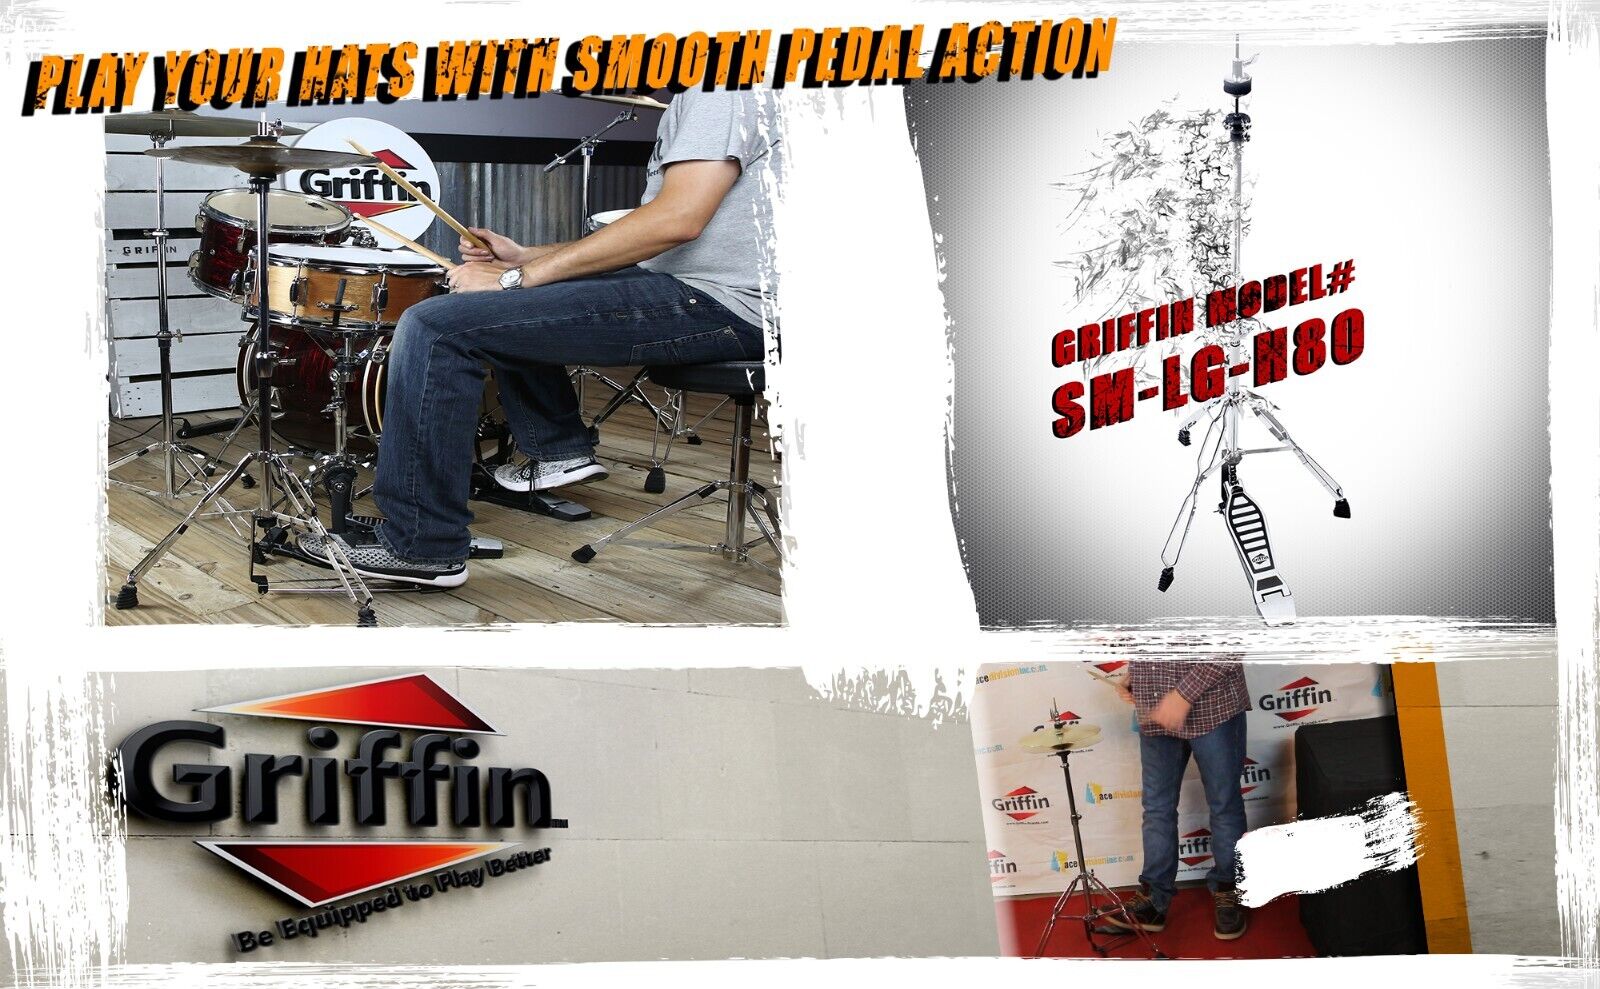 GRIFFIN Hi-Hat Stand | HiHat Cymbal Hardware Drum Pedal Holder Percussion Mount Griffin SM-LG-H80 - фотография #5